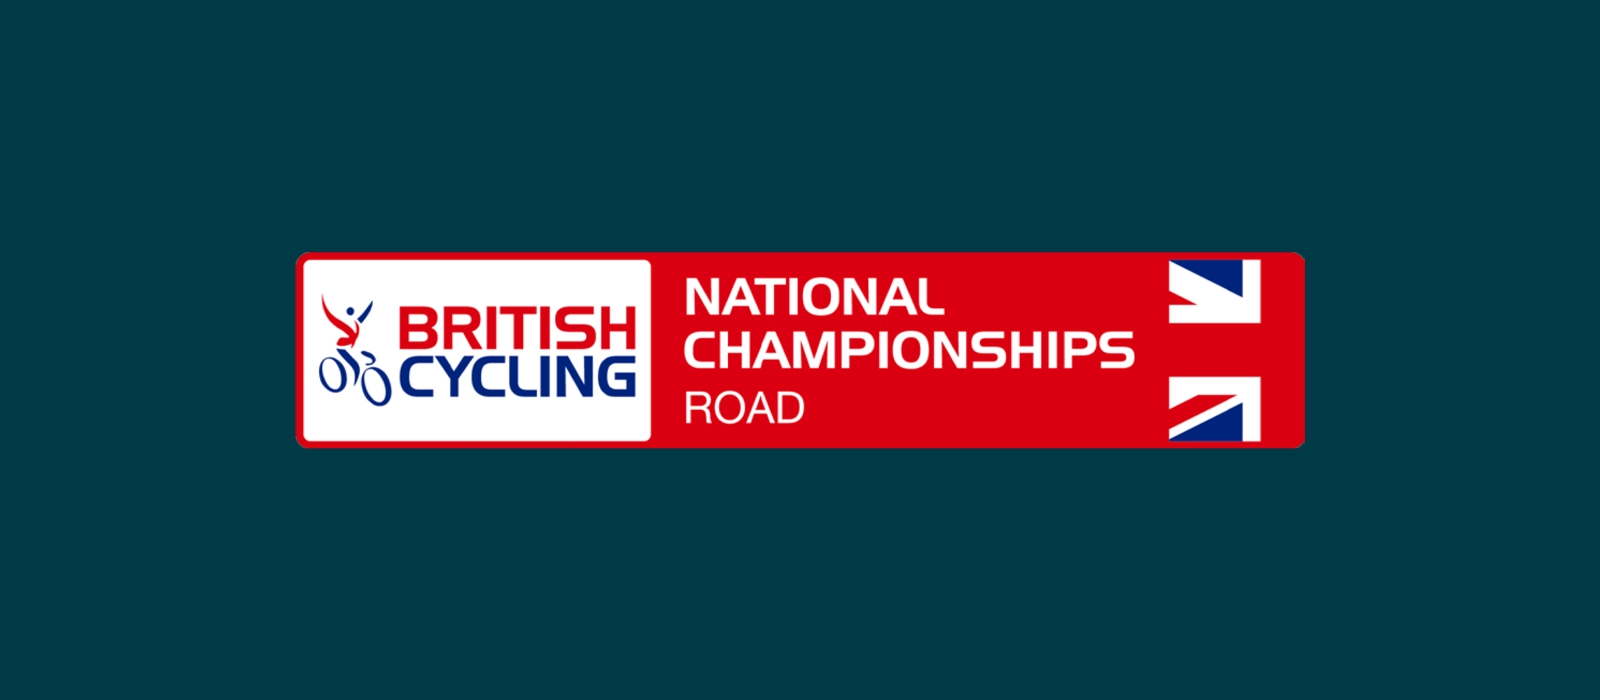 Feature post image with British Cycling National Champs artwork